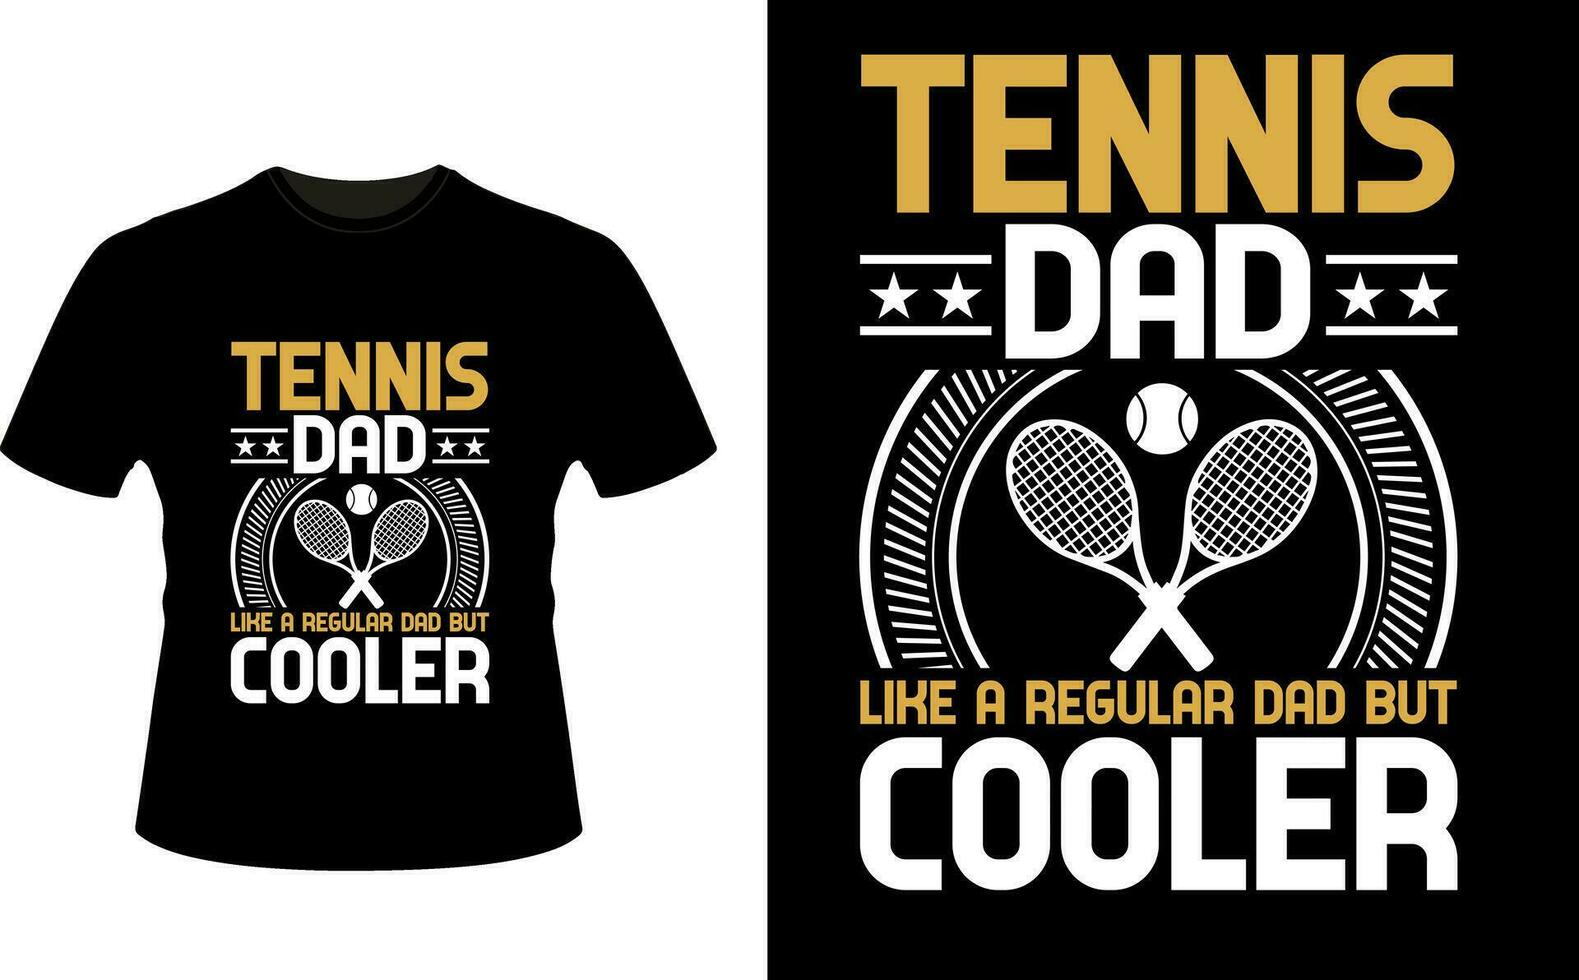 Tennis Dad Like a Regular Dad But Cooler or dad papa tshirt design or Father day t shirt Design vector